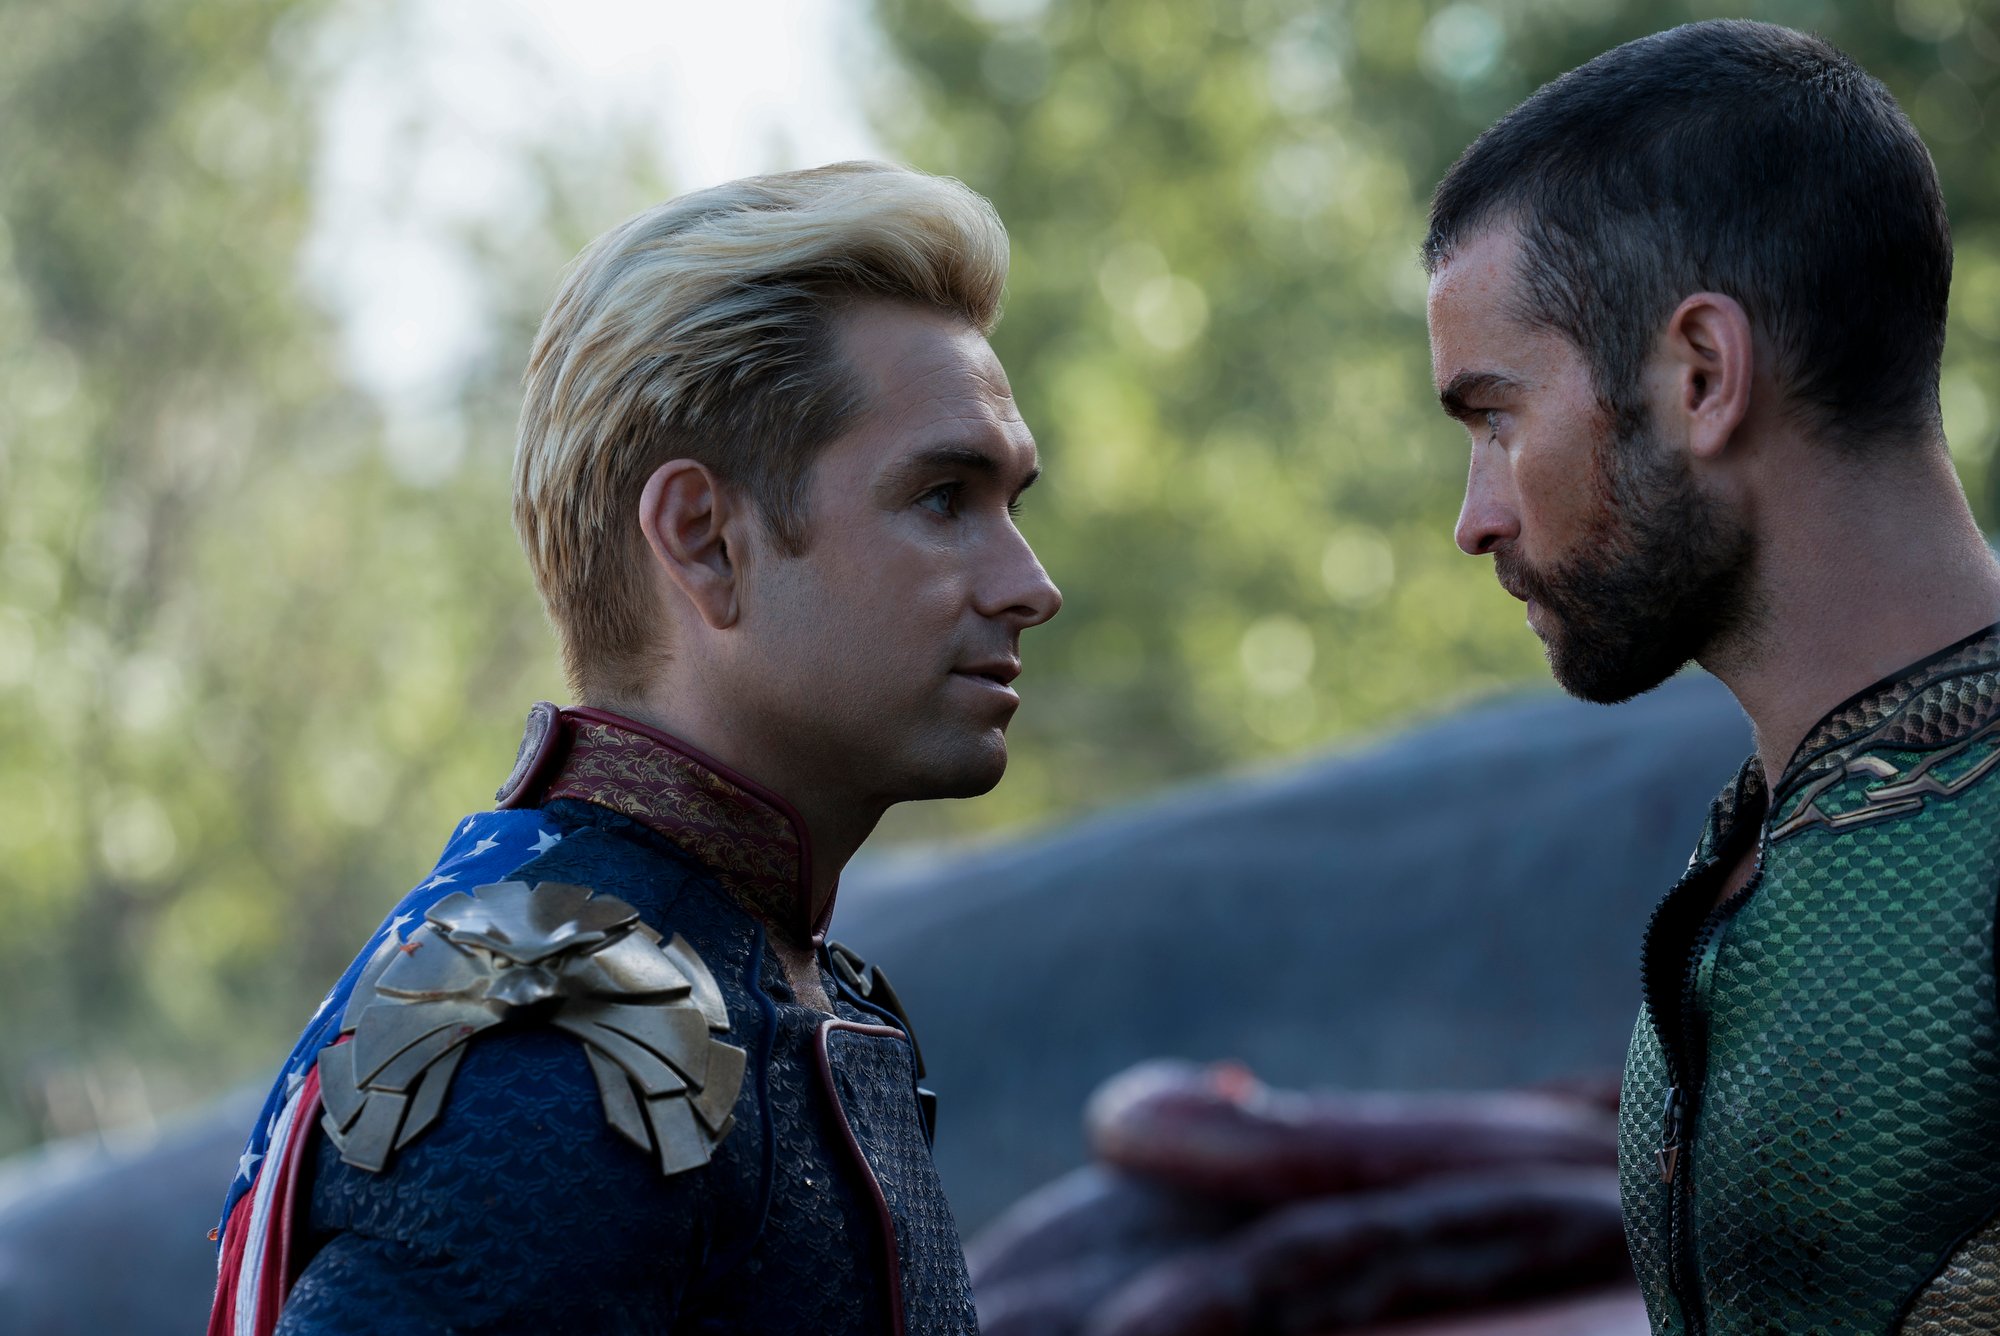 'The Boys' Antony Starr as Homelander and Chace Crawford as The Deep wearing their superhero costumes looking serious at each other